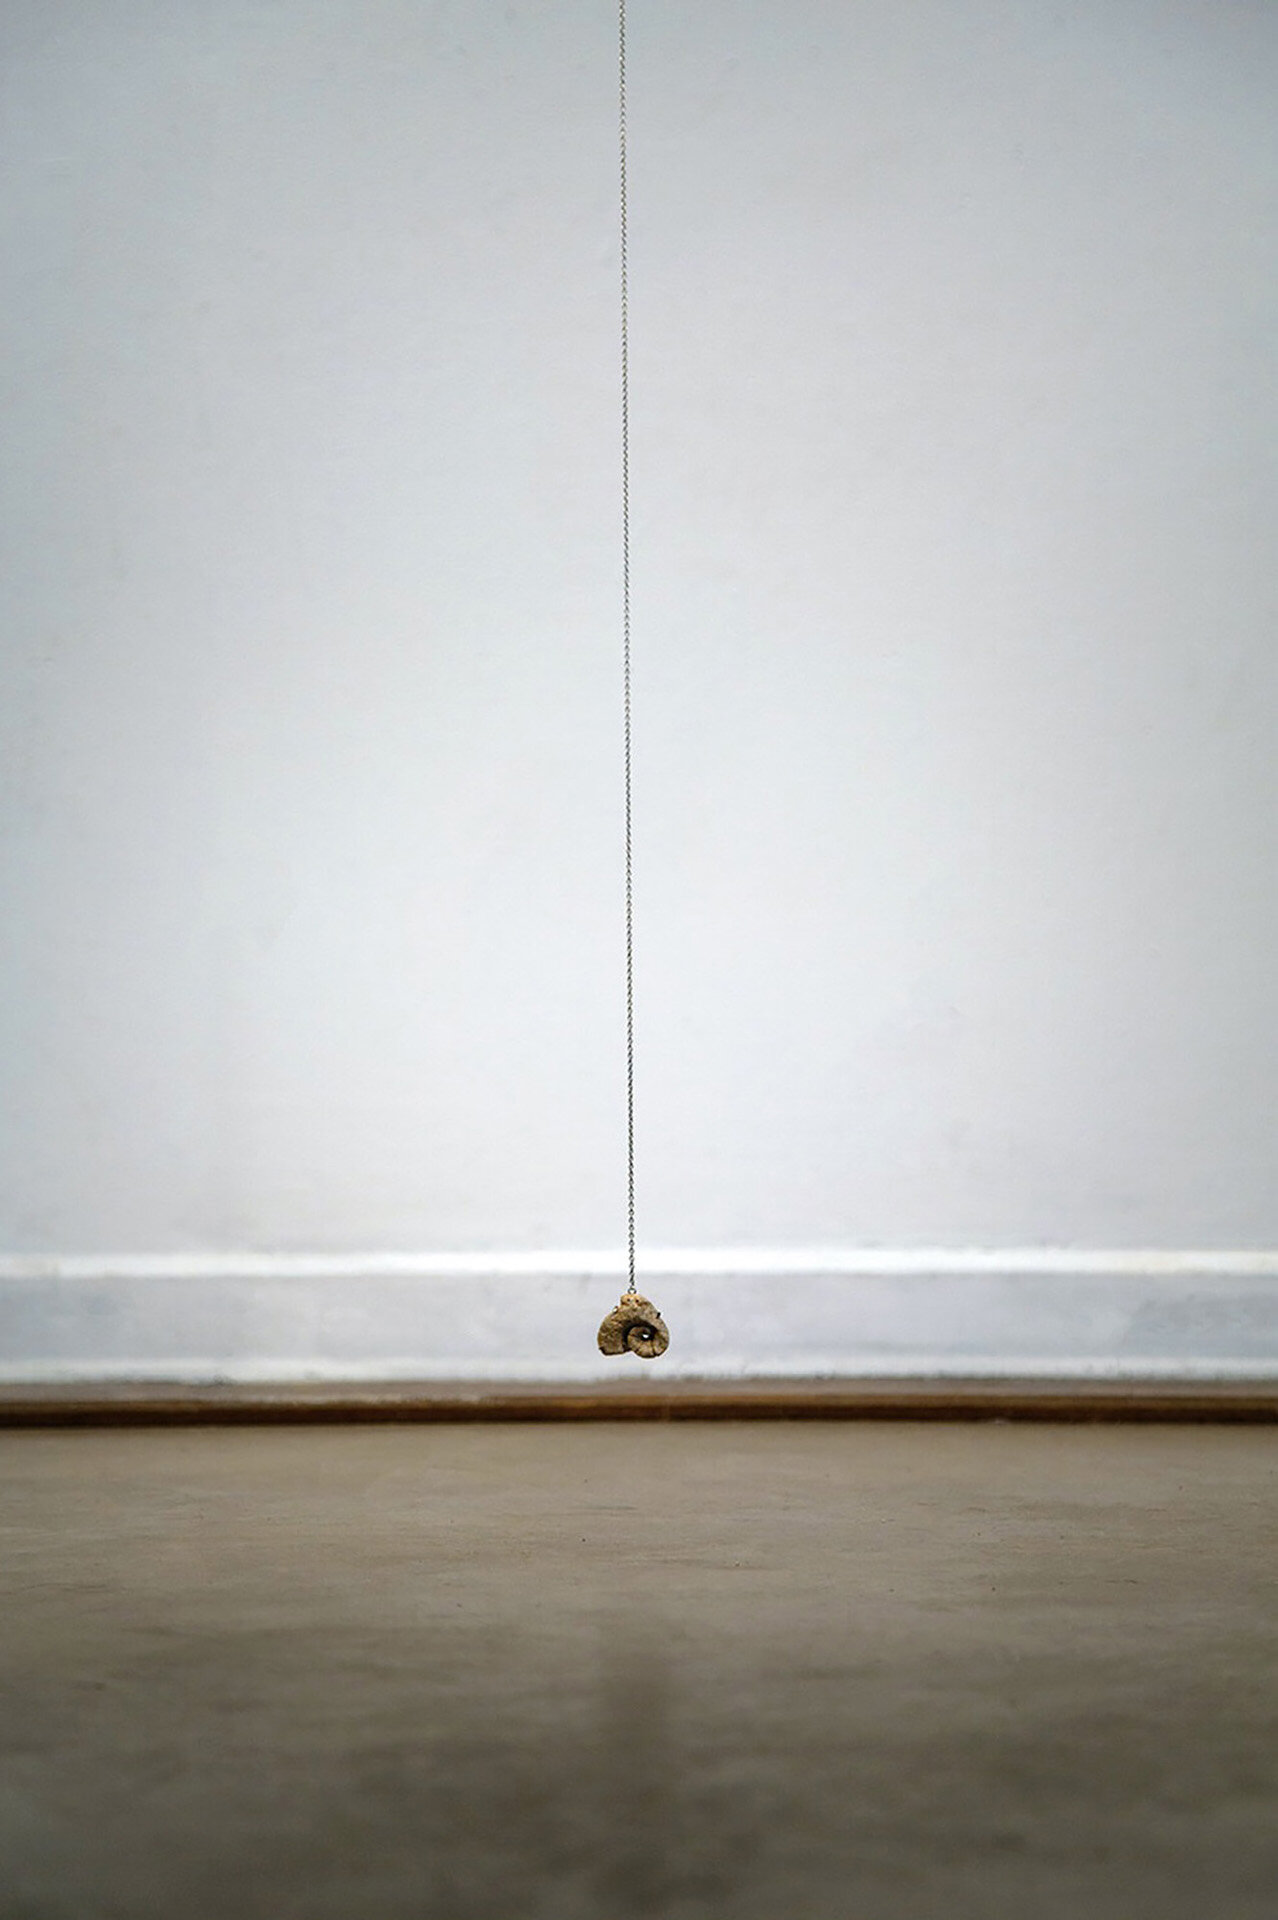    gastropod pendulum  , 2019 collected gastropod fossil, silver chain 15 ft. x 3 in. x 1 in. setting by Beth Burns-Jones 